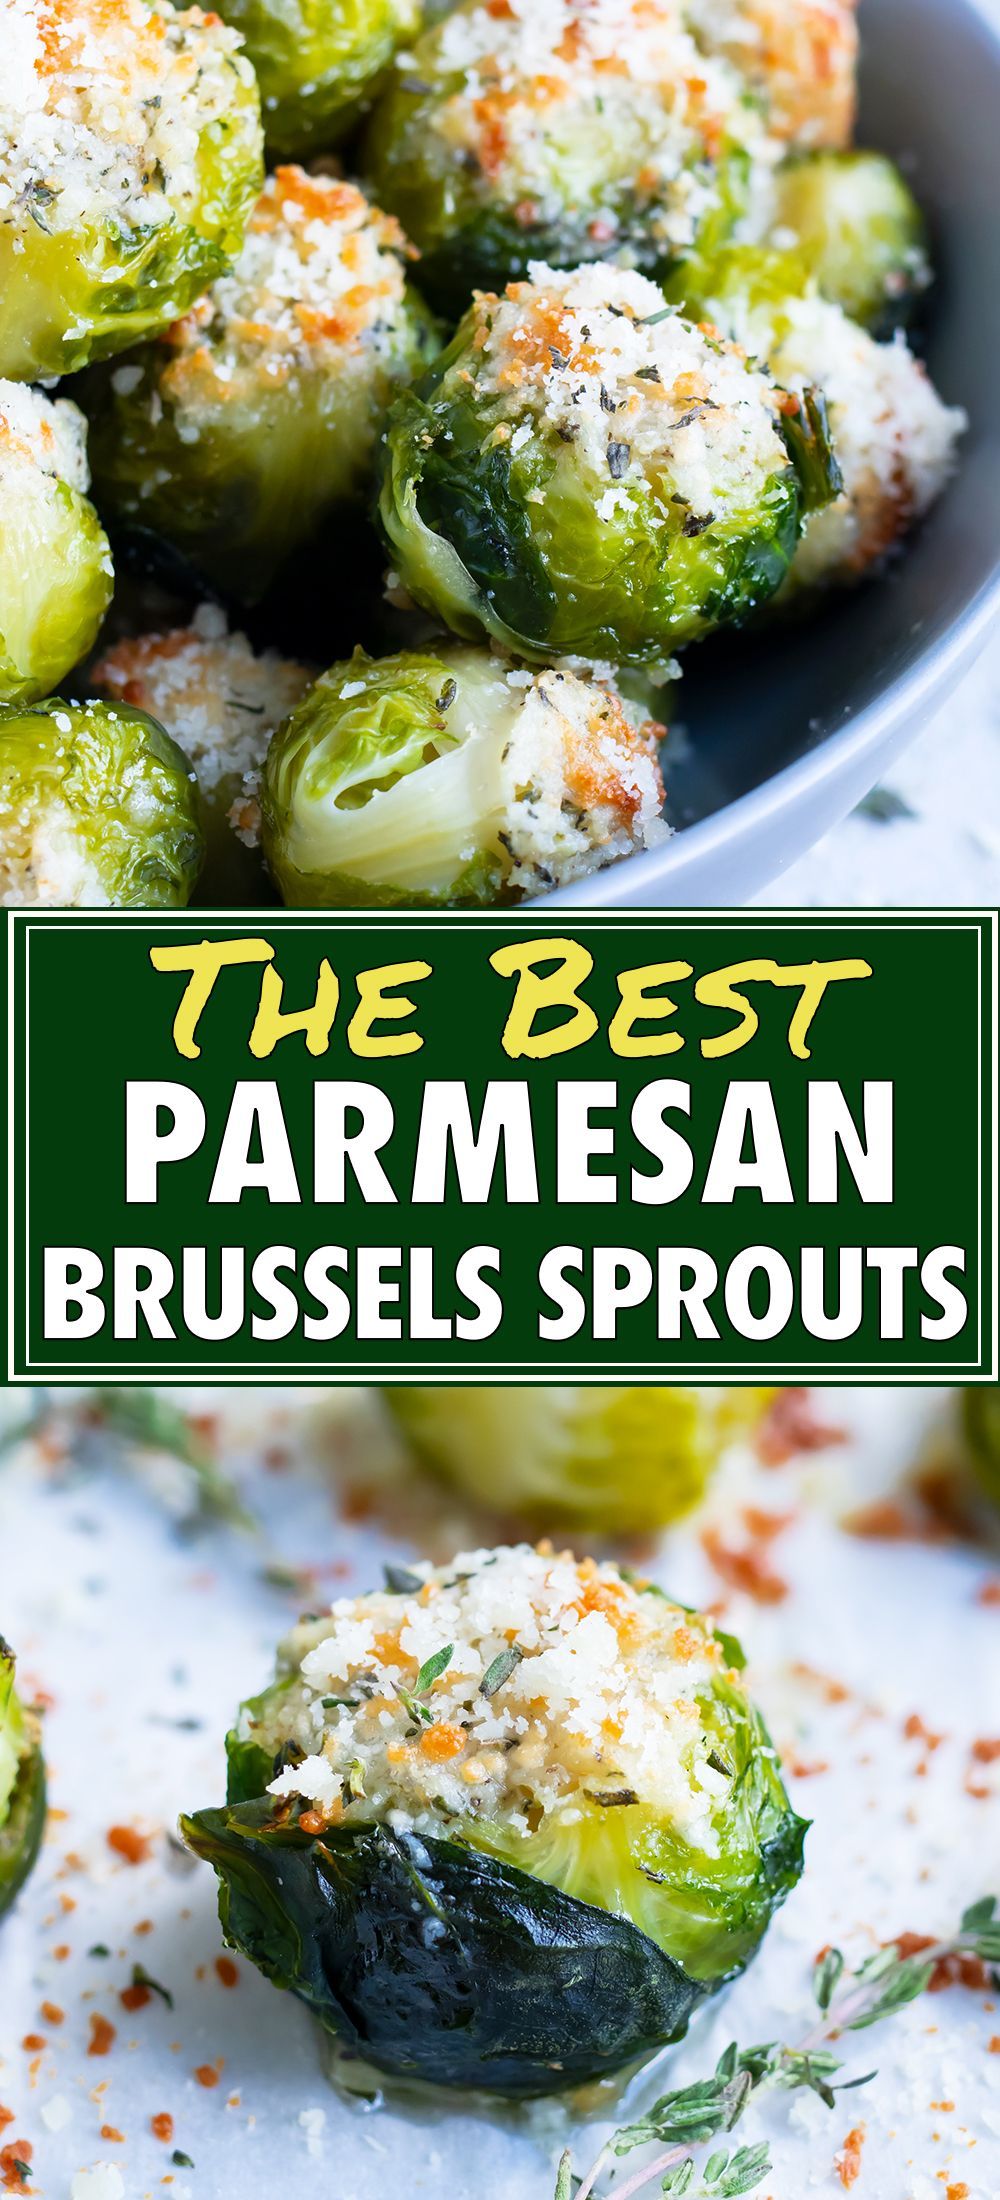 The BEST Parmesan Brussels Sprouts -   19 vegetable sides for thanksgiving dinner ideas